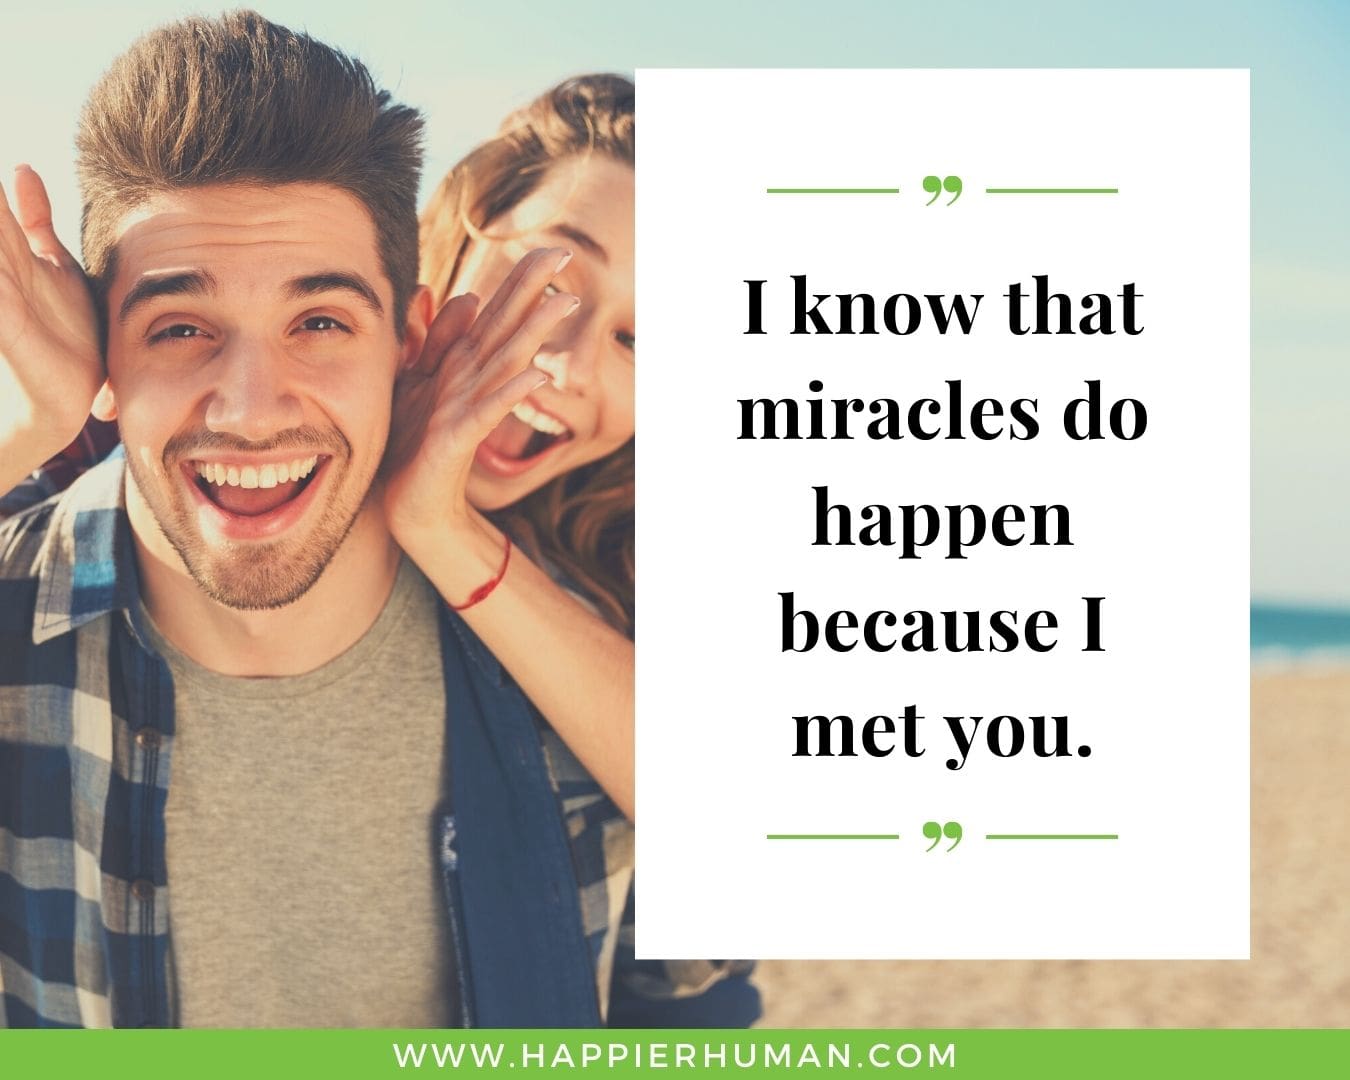 Short, Deep Love Quotes for Her - “I know that miracles do happen because I met you.”